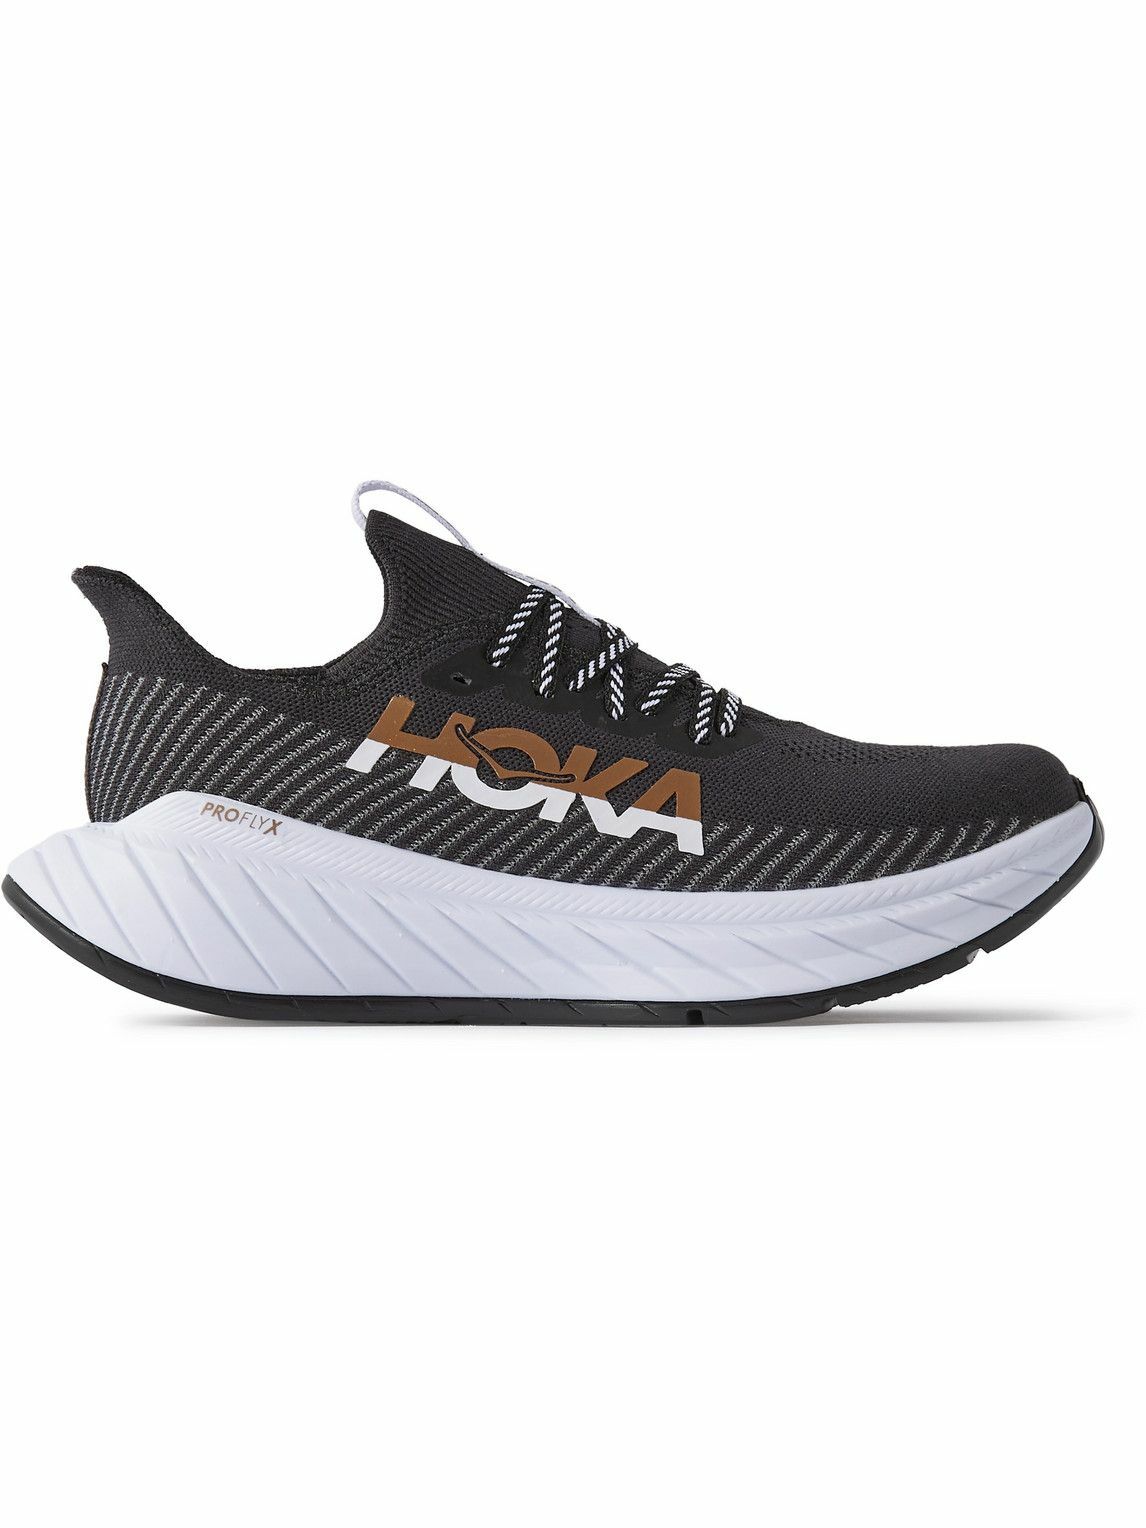 Hoka One One - Carbon X3 Rubber-Trimmed Mesh Running Sneakers - Black ...